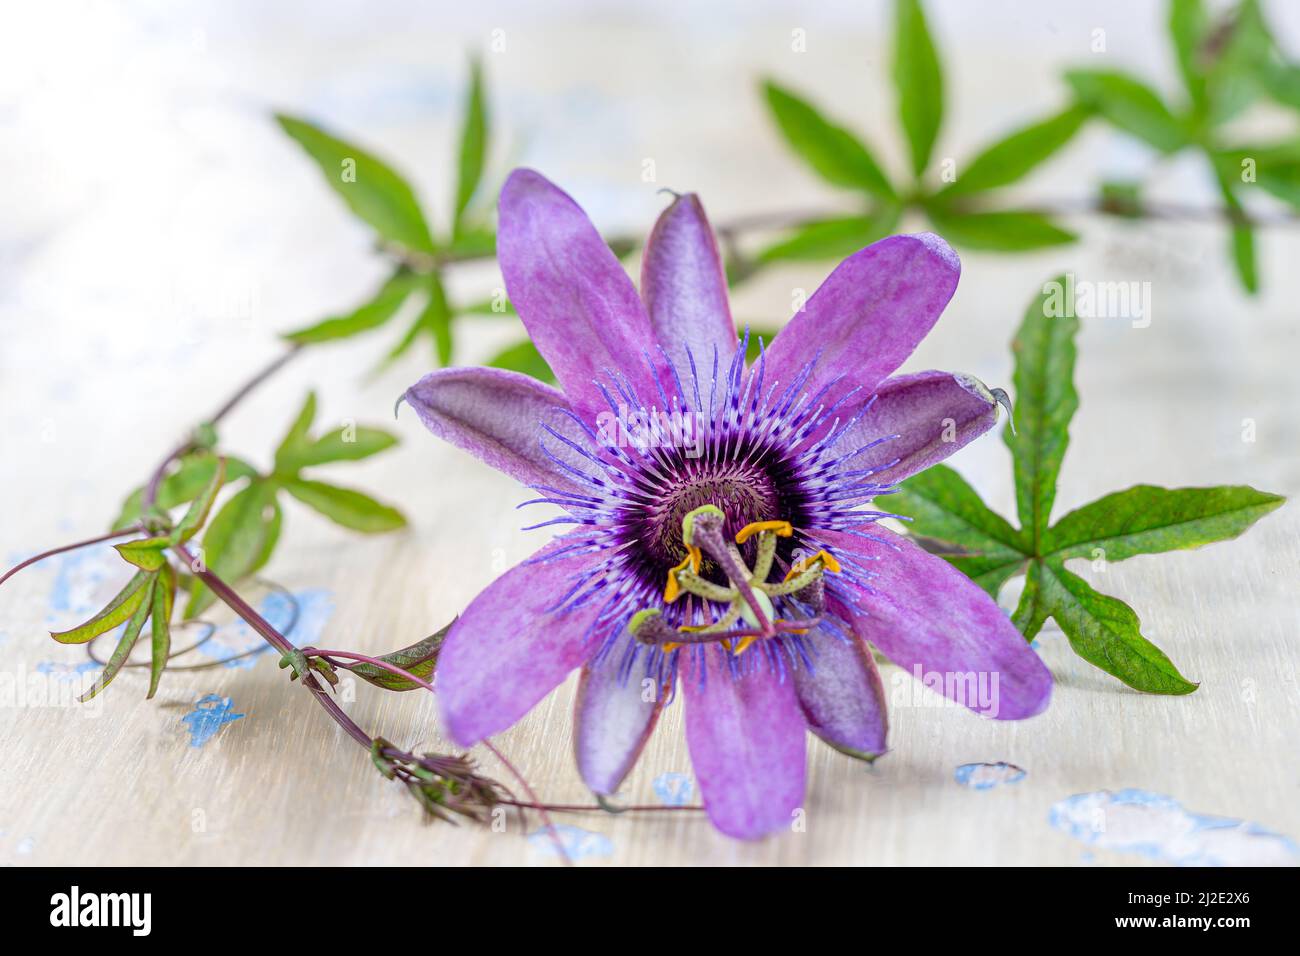 Passionflower medicinal flower Stock Photo